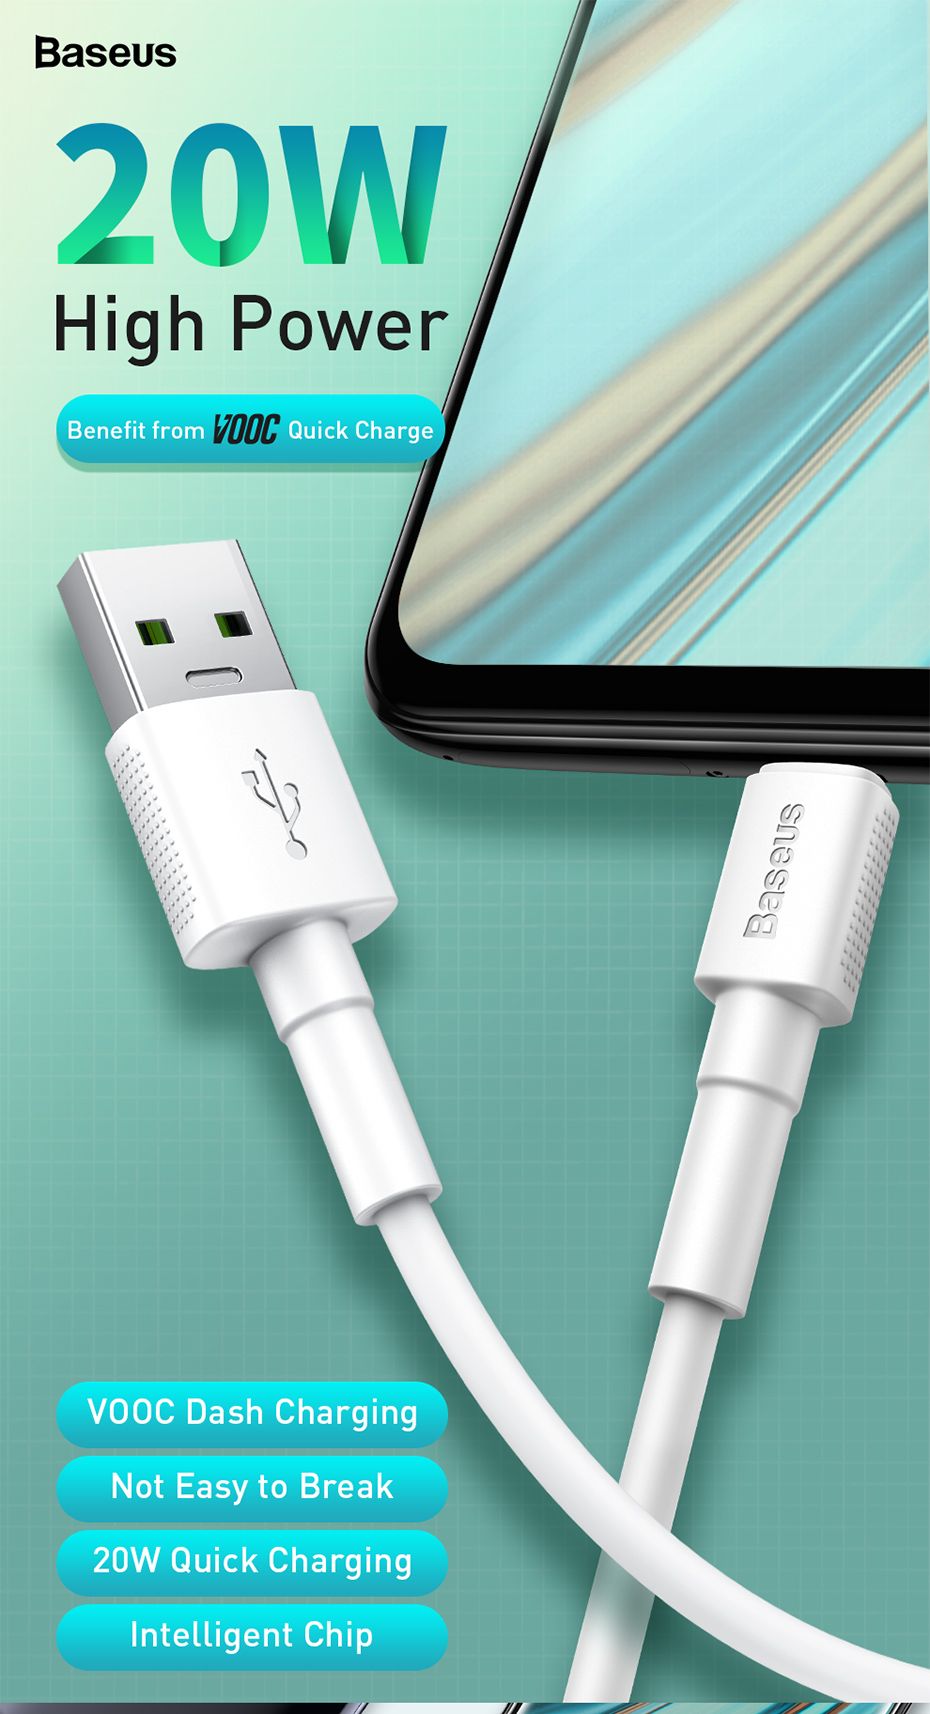 Baseus-VOOC-Dash-Charging-20w-Quick-Micro-USB-Data-Cable-for-Find-7-Series-N3-1564324